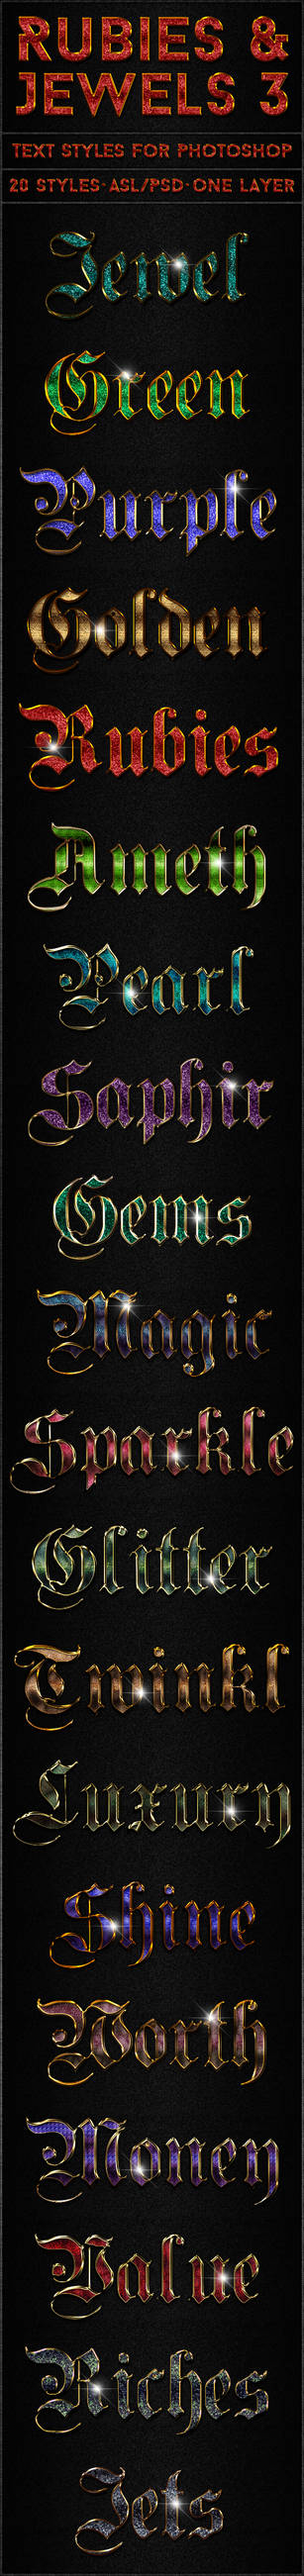 Rubies and Jewels 3 - Text Styles